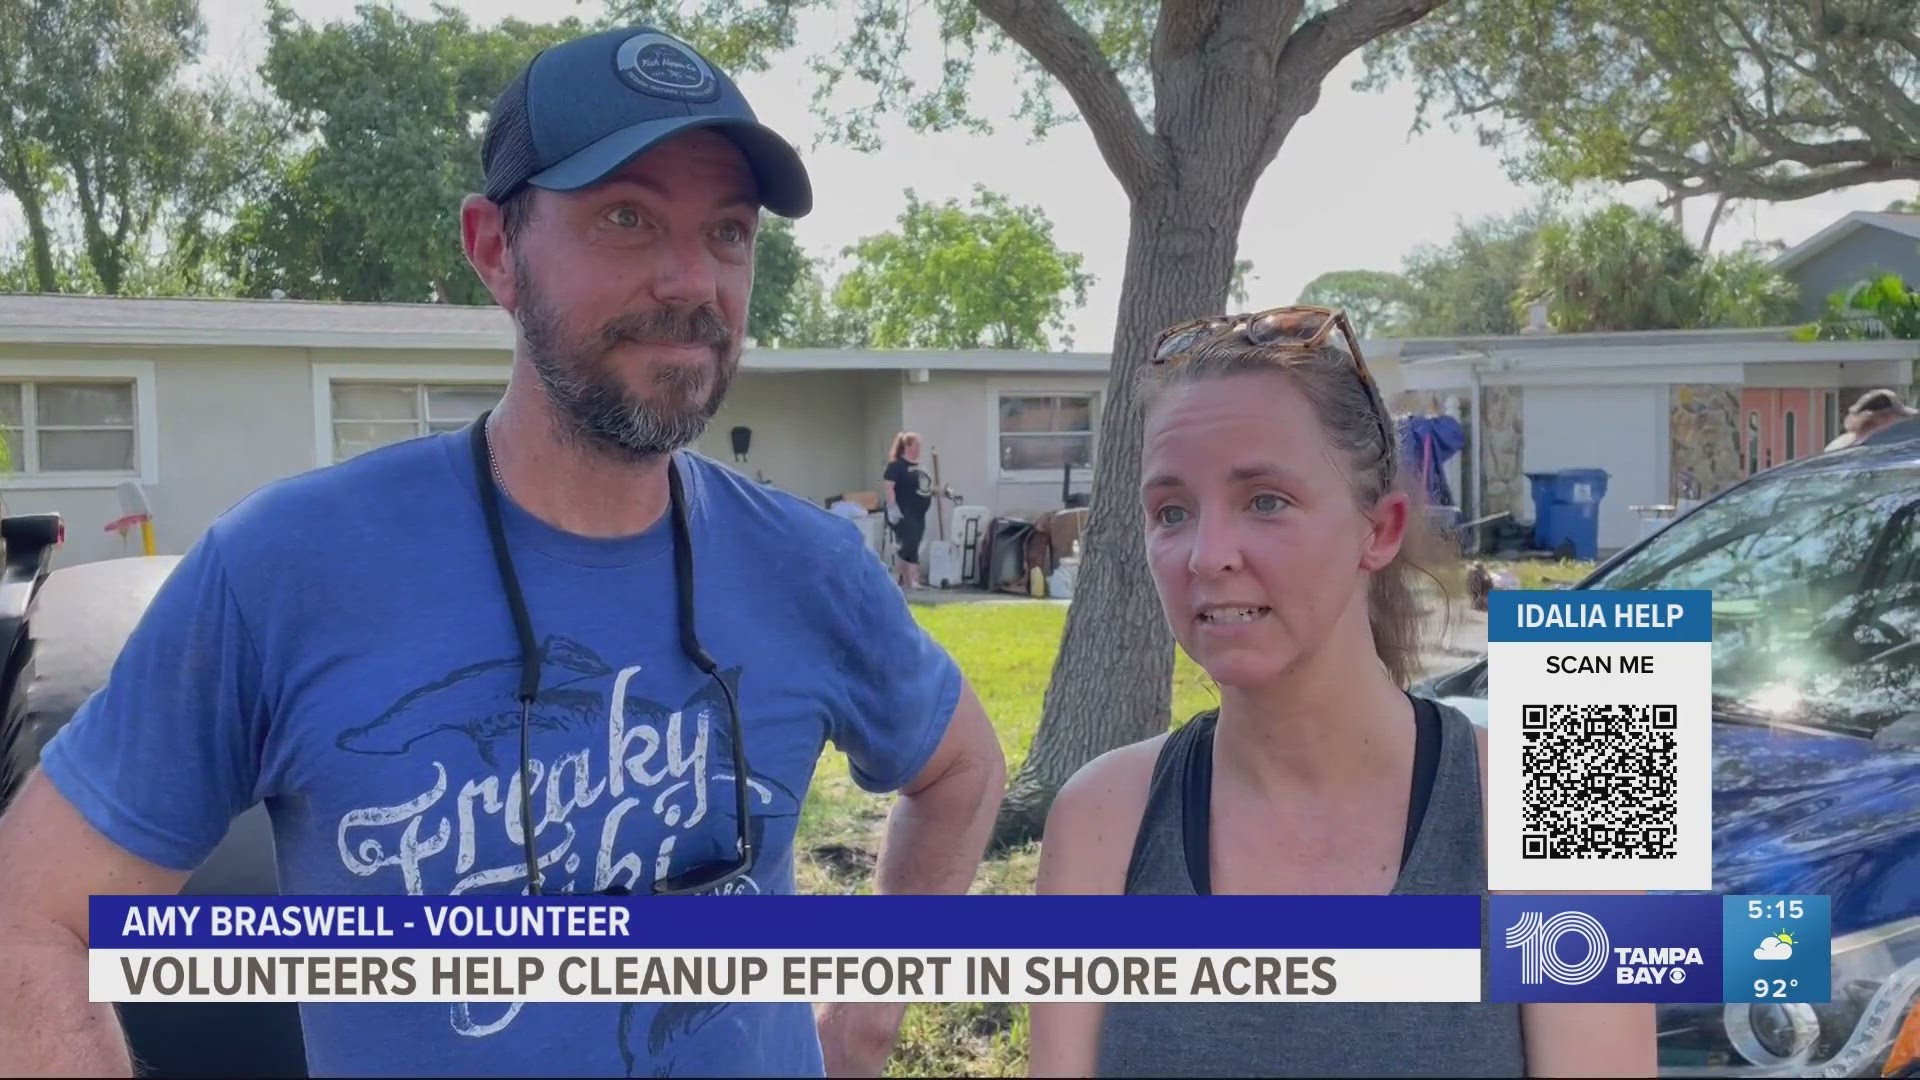 A call to action from a local man's social media page led to a group of volunteers helping several families clean up after flooding from Hurricane Idalia.